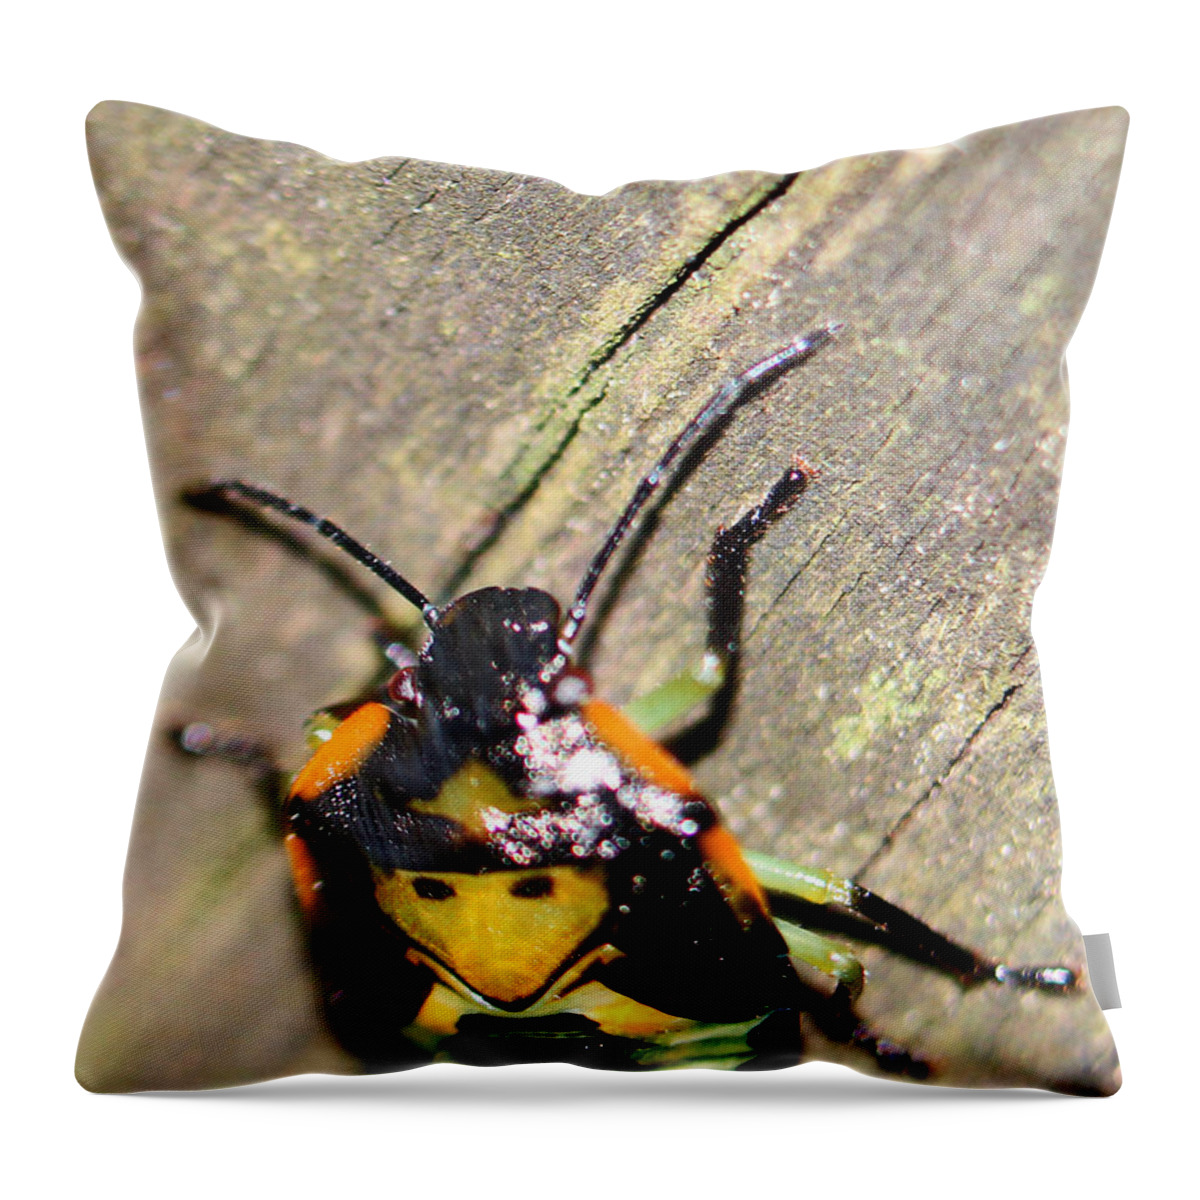 Insects Throw Pillow featuring the photograph Alien Creature by Jennifer Robin